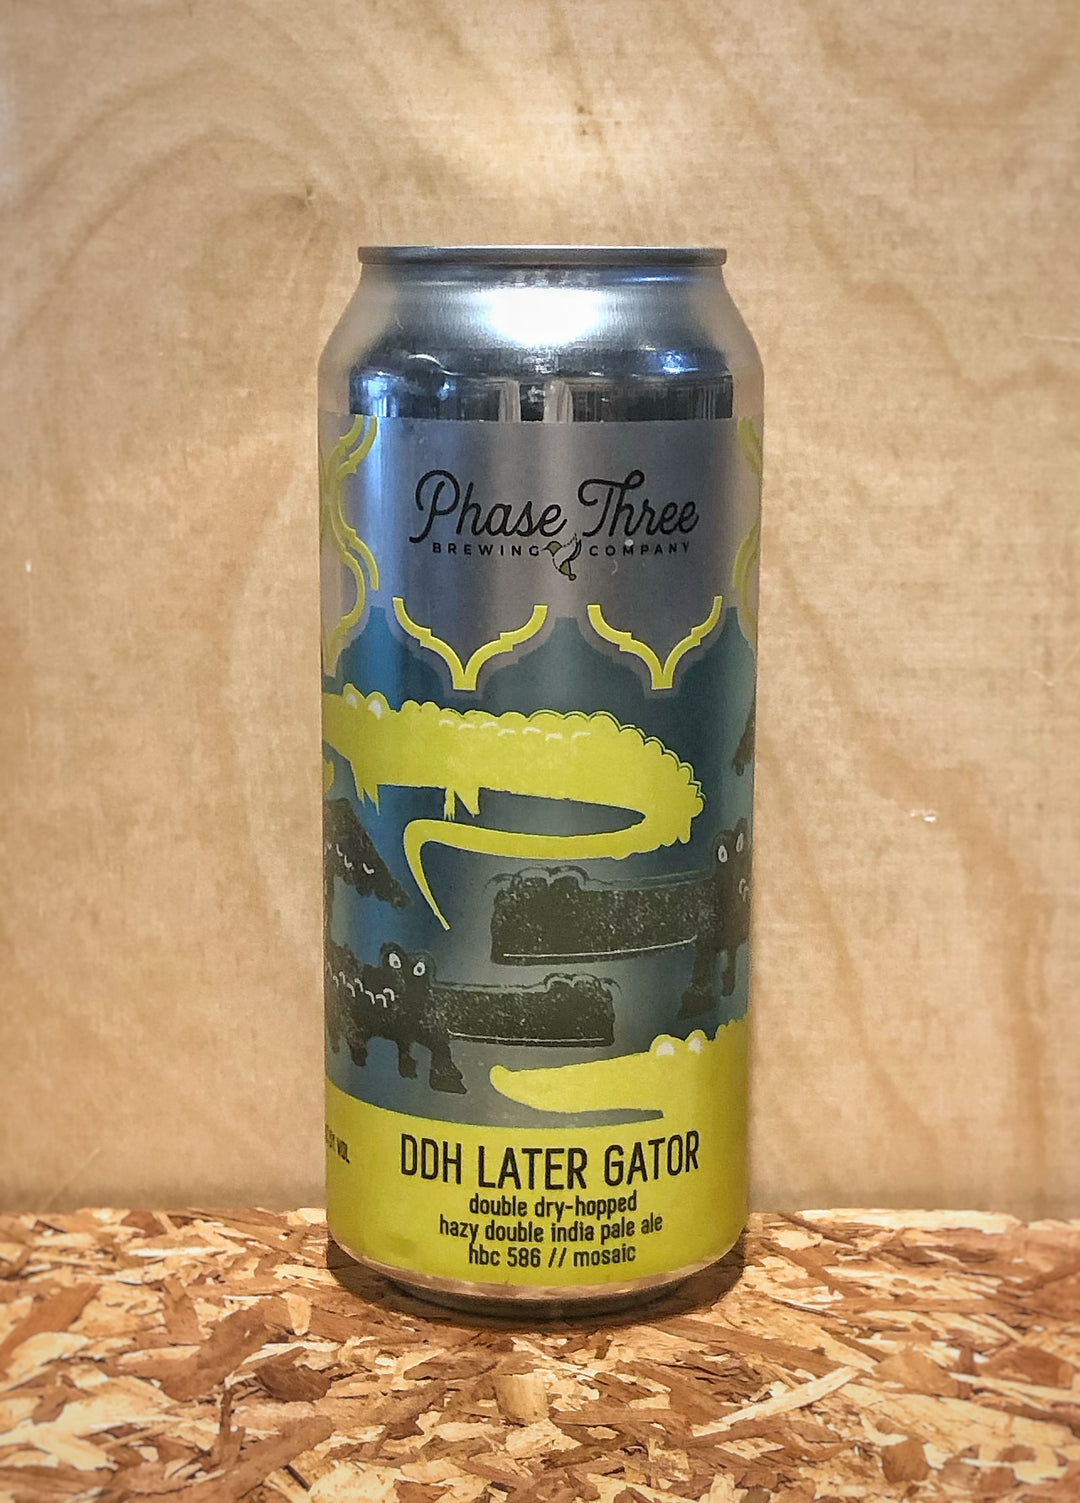 Phase Three Brewing Co. 'Later Gator' Double Dry-Hopped Hazy Double IPA (Lake Zurich, IL)